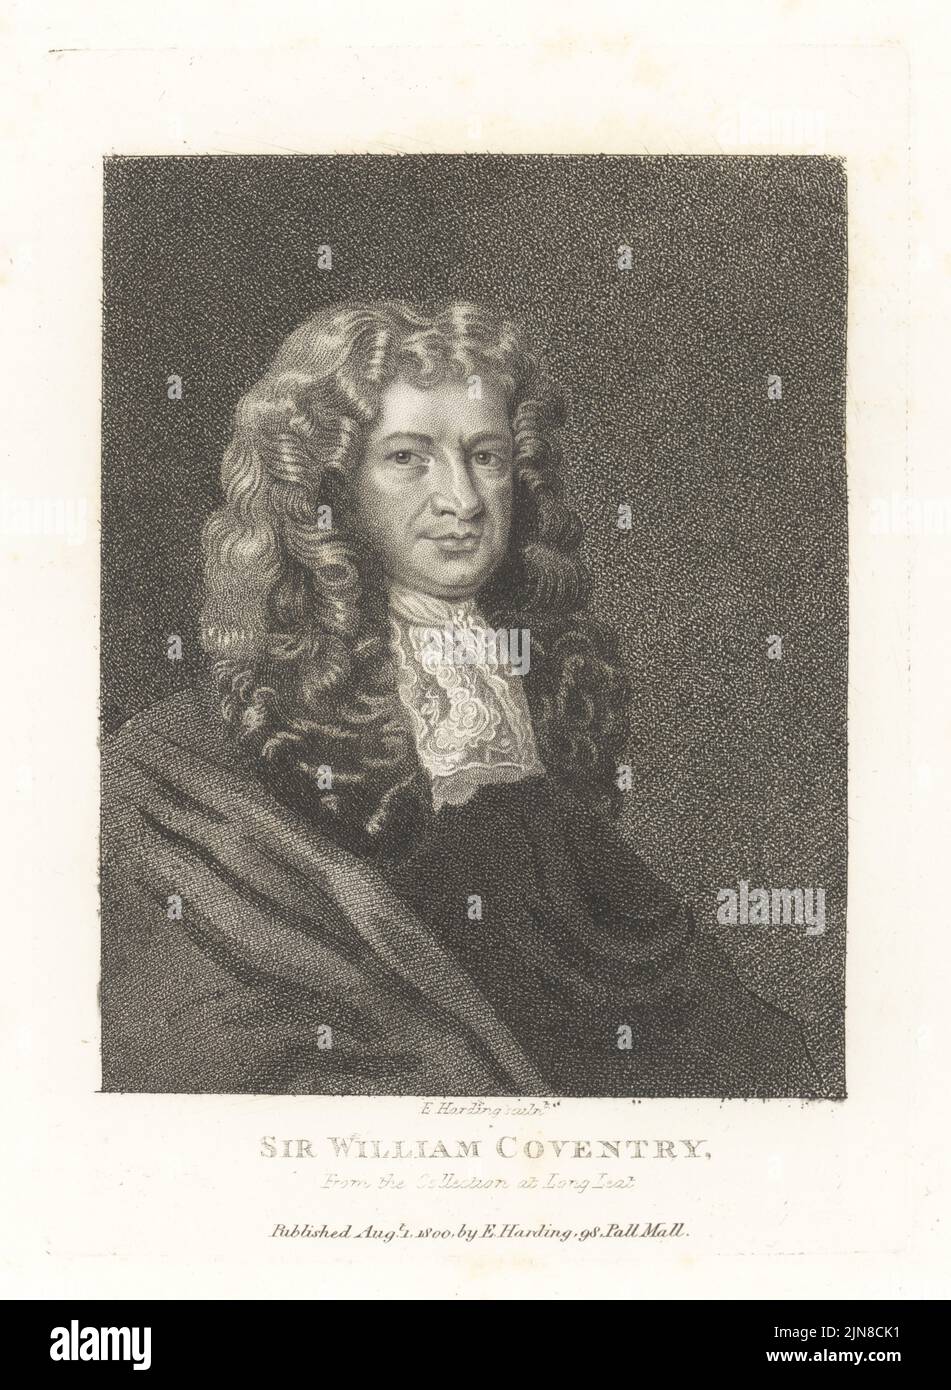 Sir William Coventry, English statesman, MP, Doctor of Law at Oxford, Privy Councillor, commissioner of the Treasury, c.1628-1686. In luxuriant wig, lace collar and cloak. From the collection at Long Leat. Copperplate engraving by Edward Harding after Mary Beale from John Adolphus’ The British Cabinet, containing Portraits of Illustrious Personages, printed by T. Bensley for E. Harding, 98 Pall Mall, London, 1800. Stock Photo